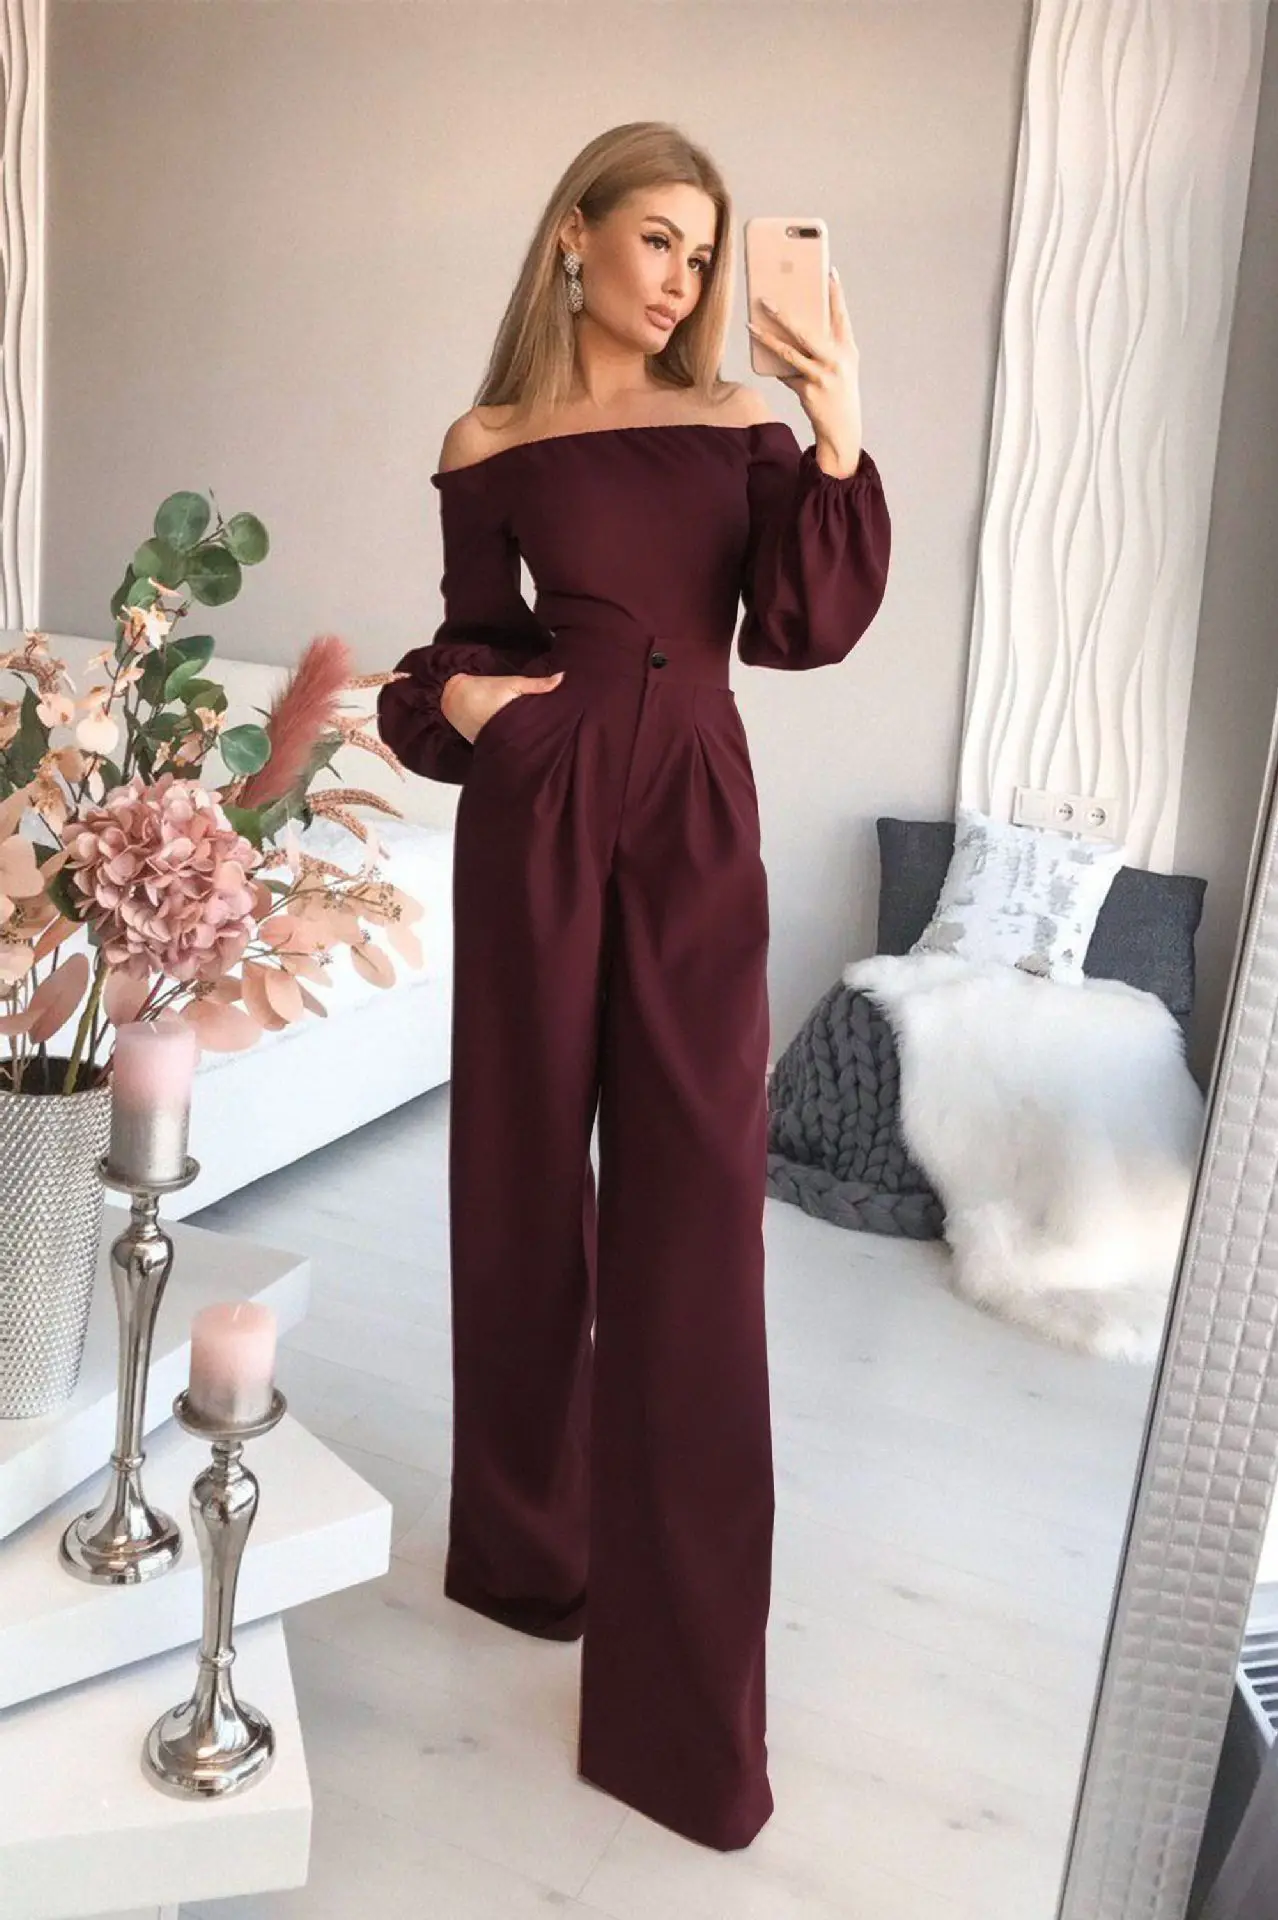 

New Fashion Women Ruffles Neck High Waist Clubwear Jumpsuit Playsuit Bandage Female Party Romper Long Trousers Clothes